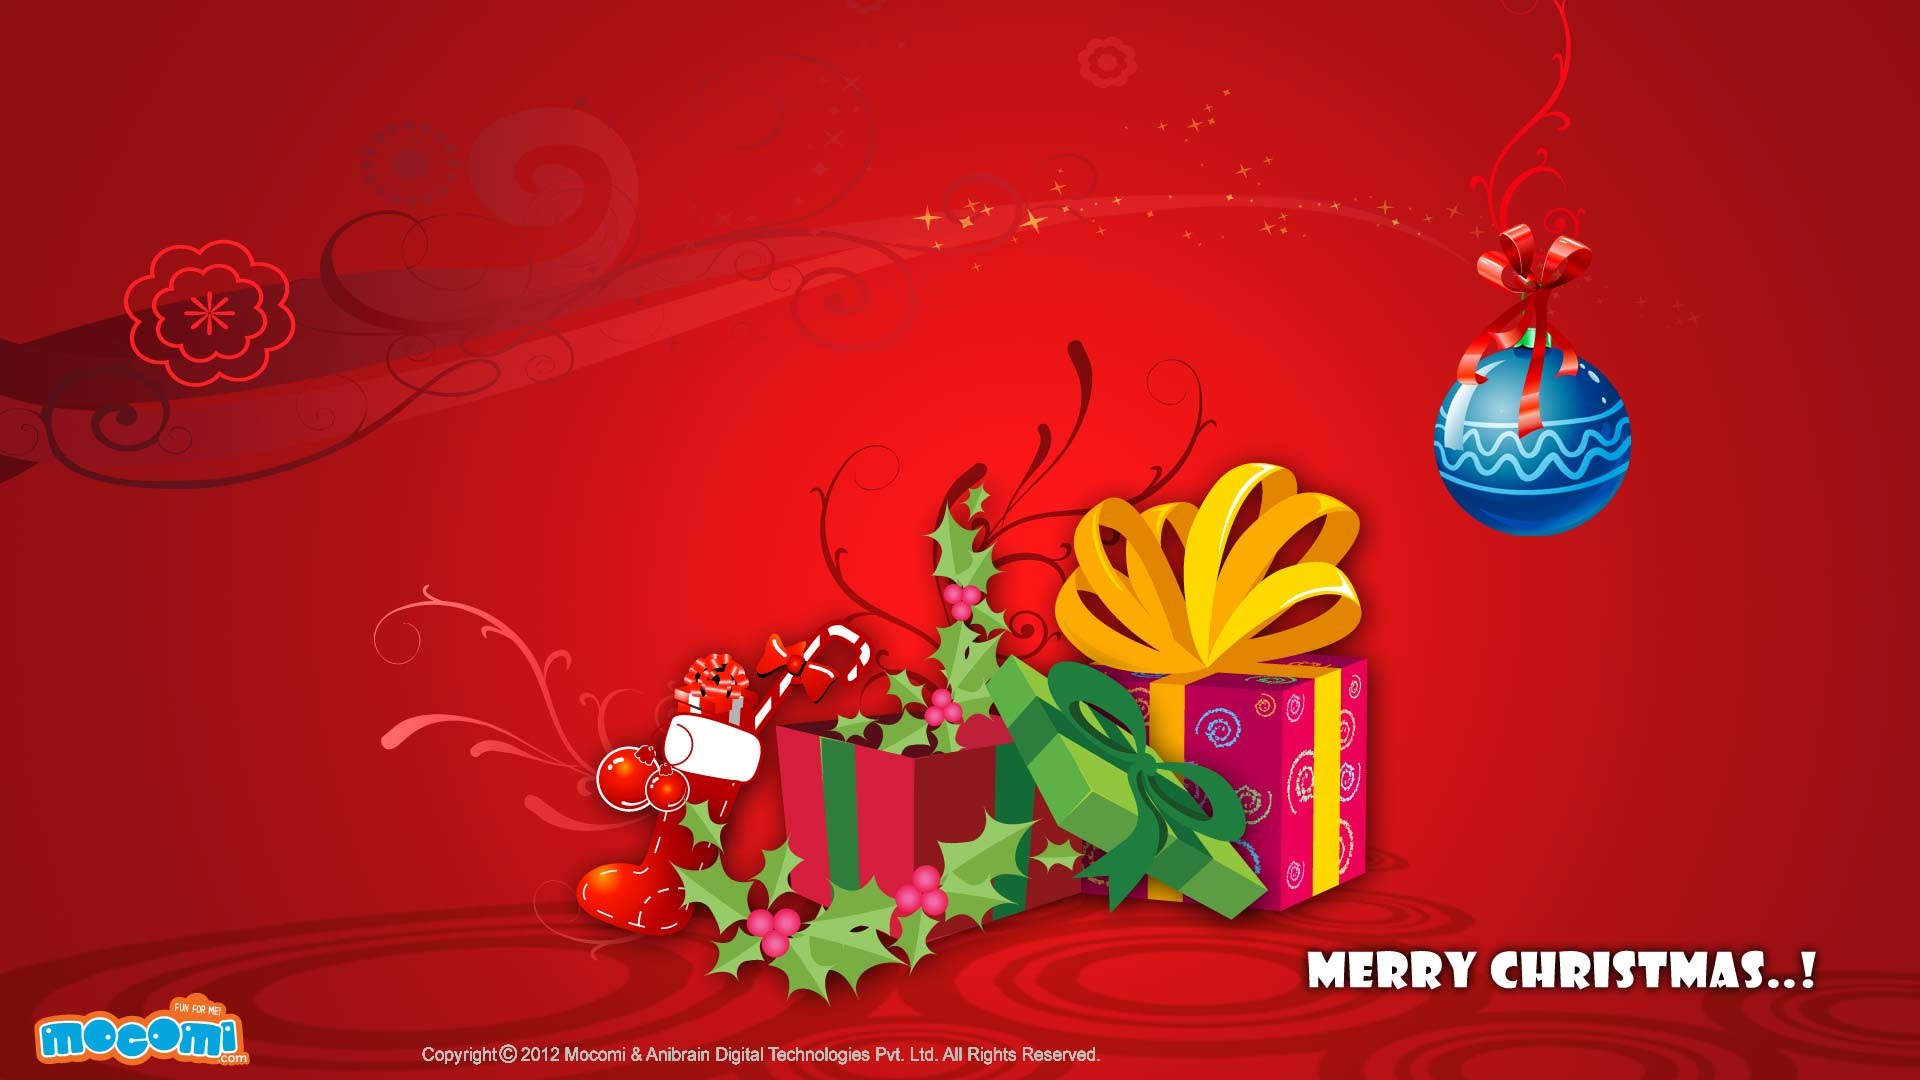 1920x1080 Merry Christmas gifts